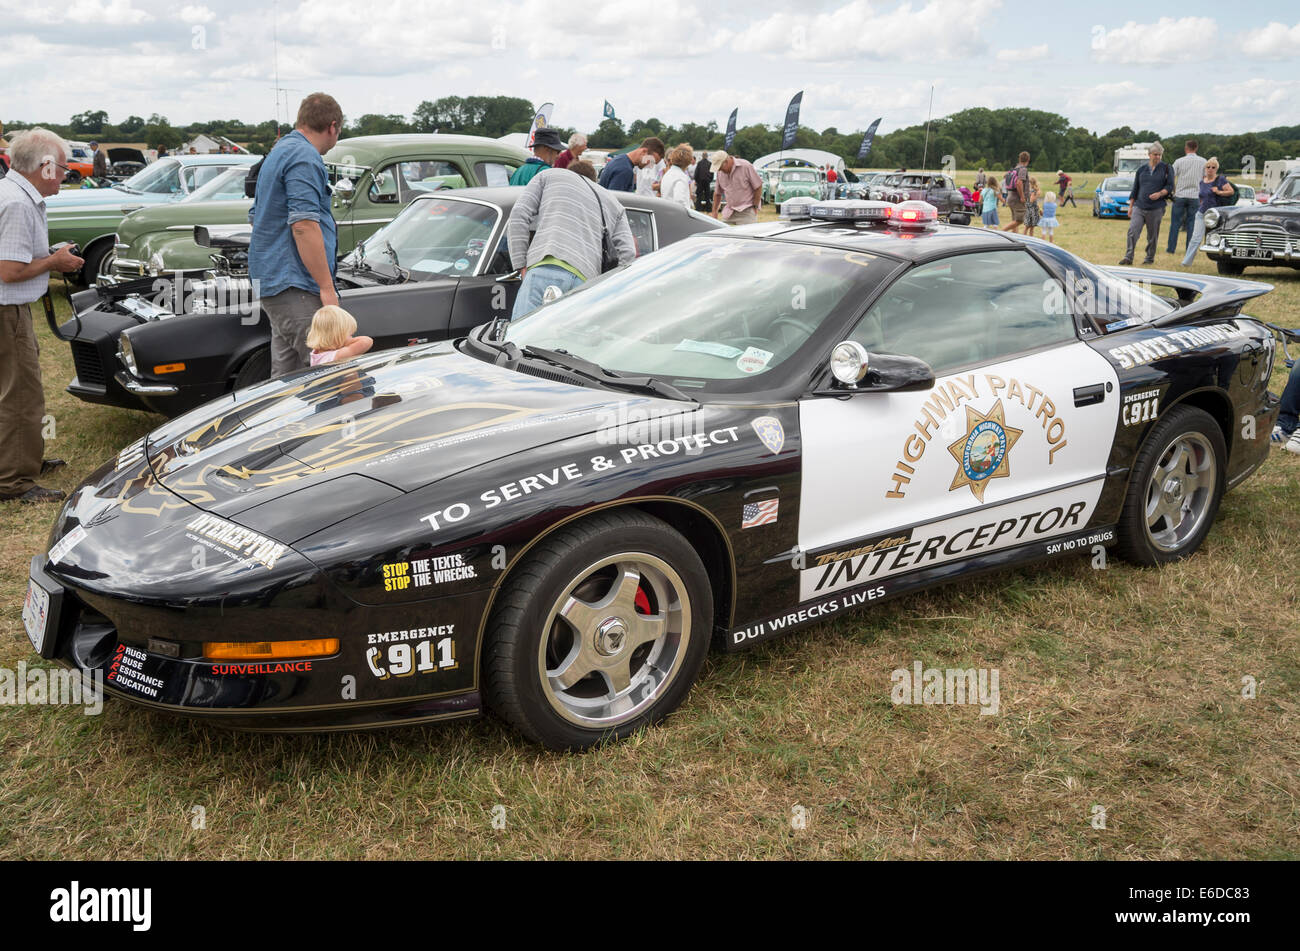 Ex-US police patrol car shown by a private owner at an English event Stock Photo